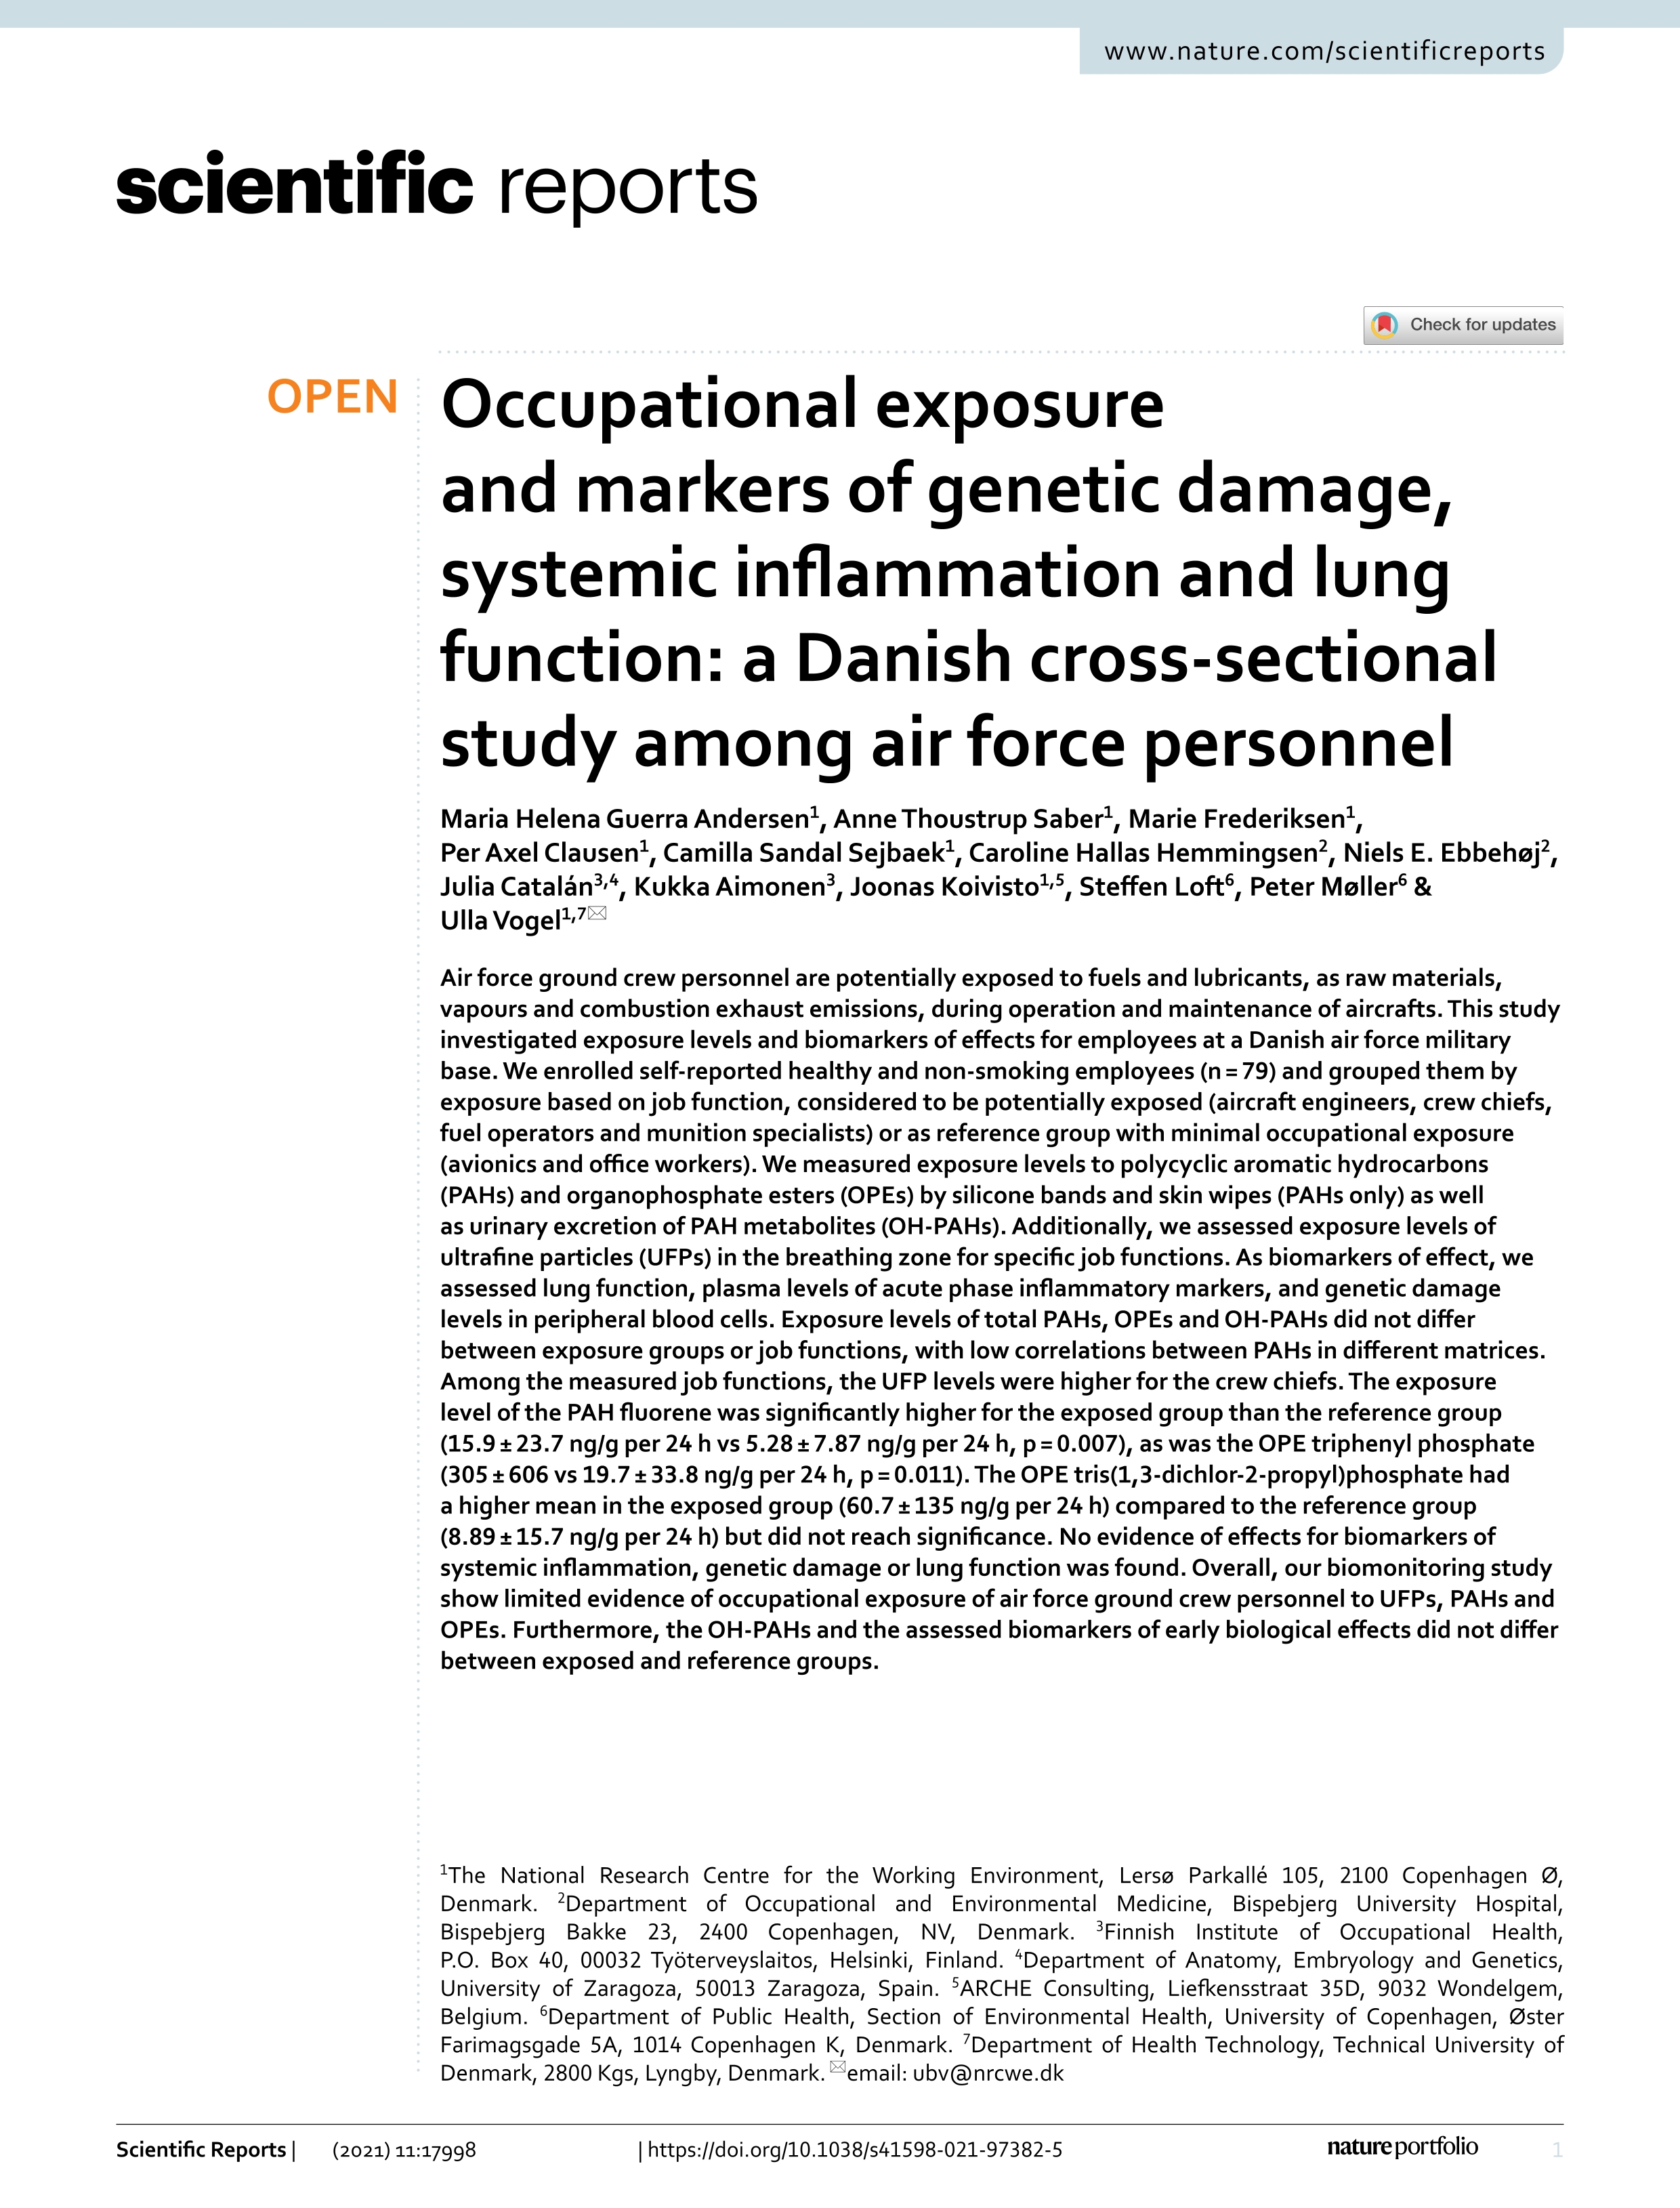 Occupational exposure and markers of genetic damage, systemic inflammation and lung function: a Danish cross-sectional study among air force personnel